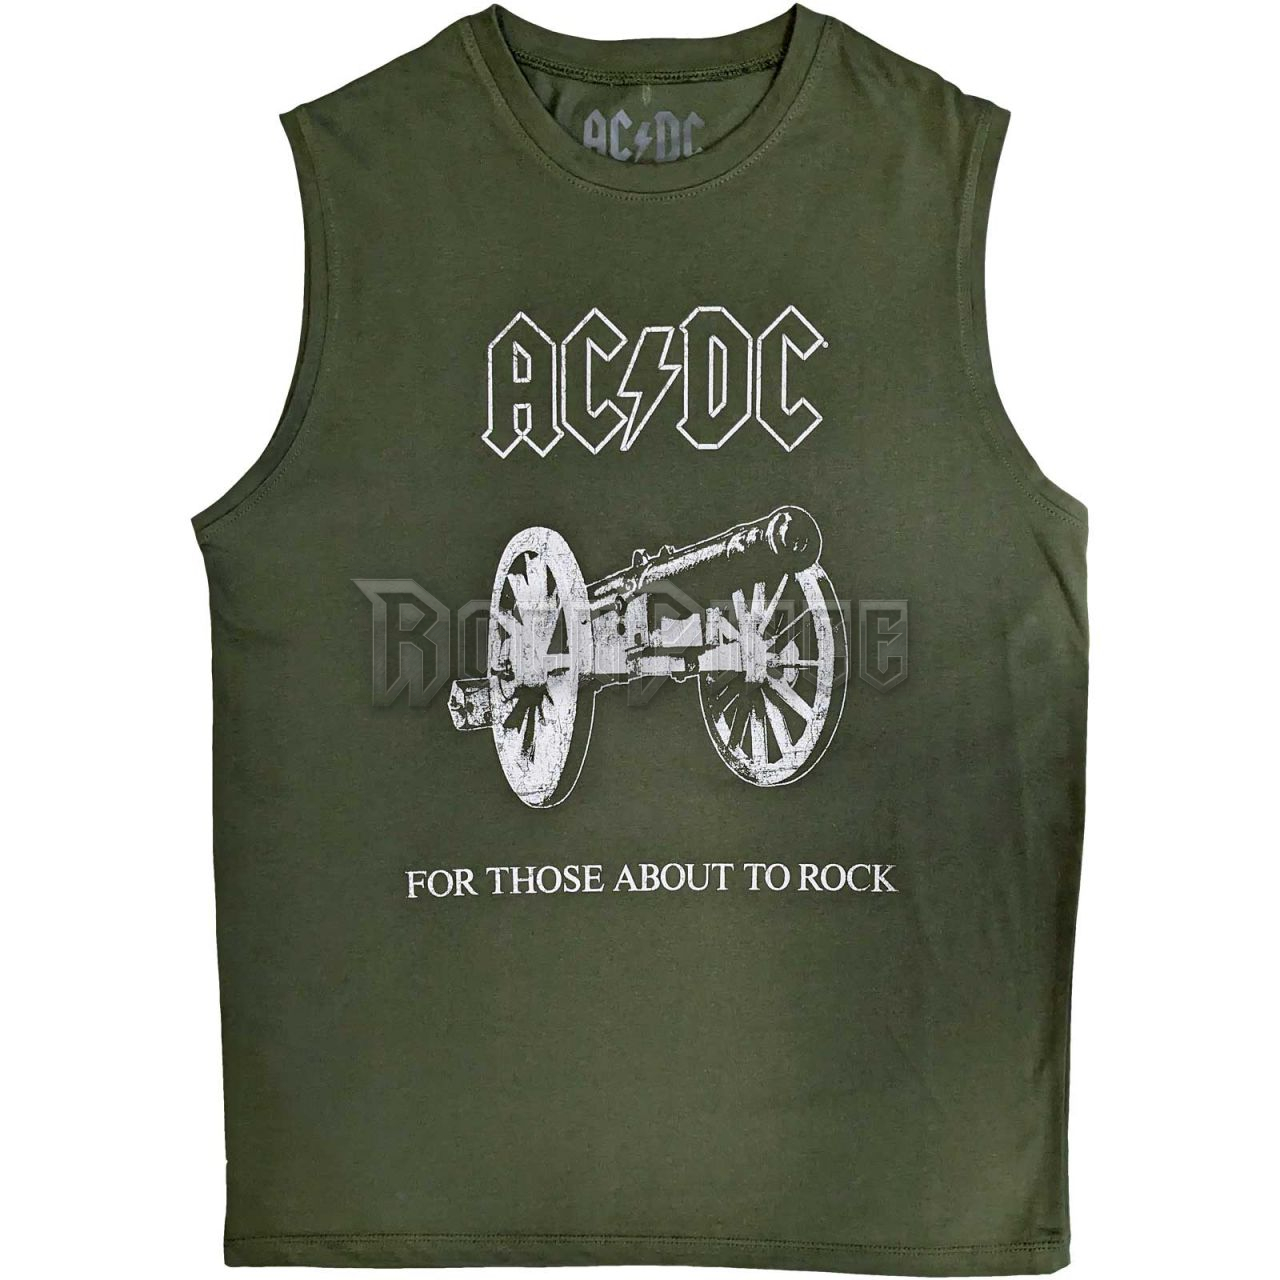 AC/DC - About To Rock - unisex trikó - ACDCTANK06MGR